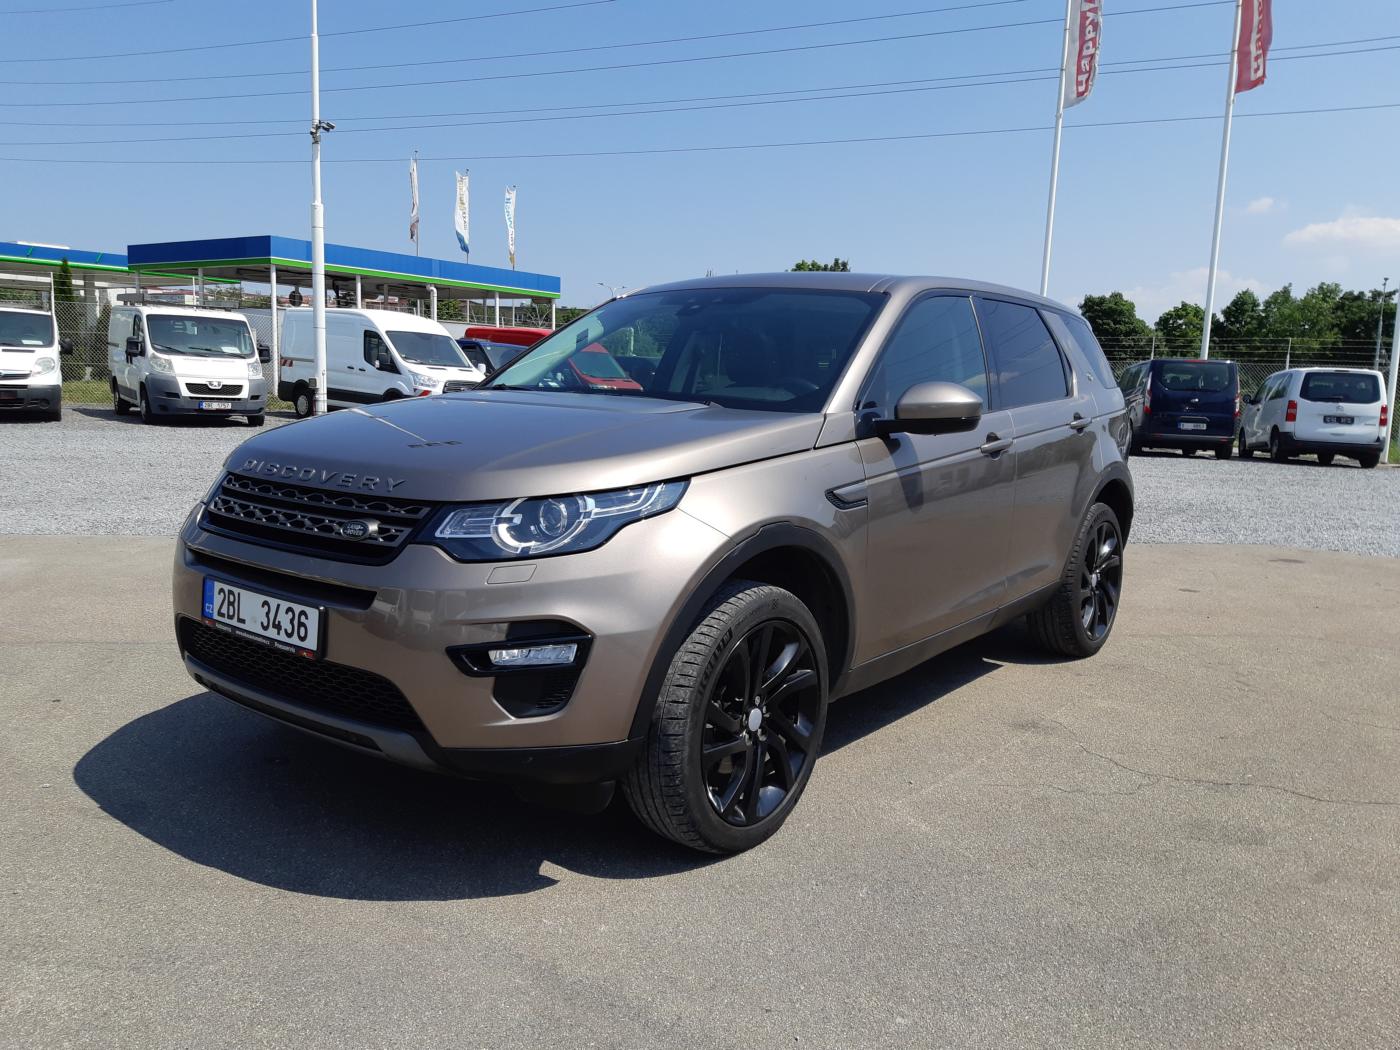 Land Rover Discovery Sport 2.0 TD4 135kW SE AWD